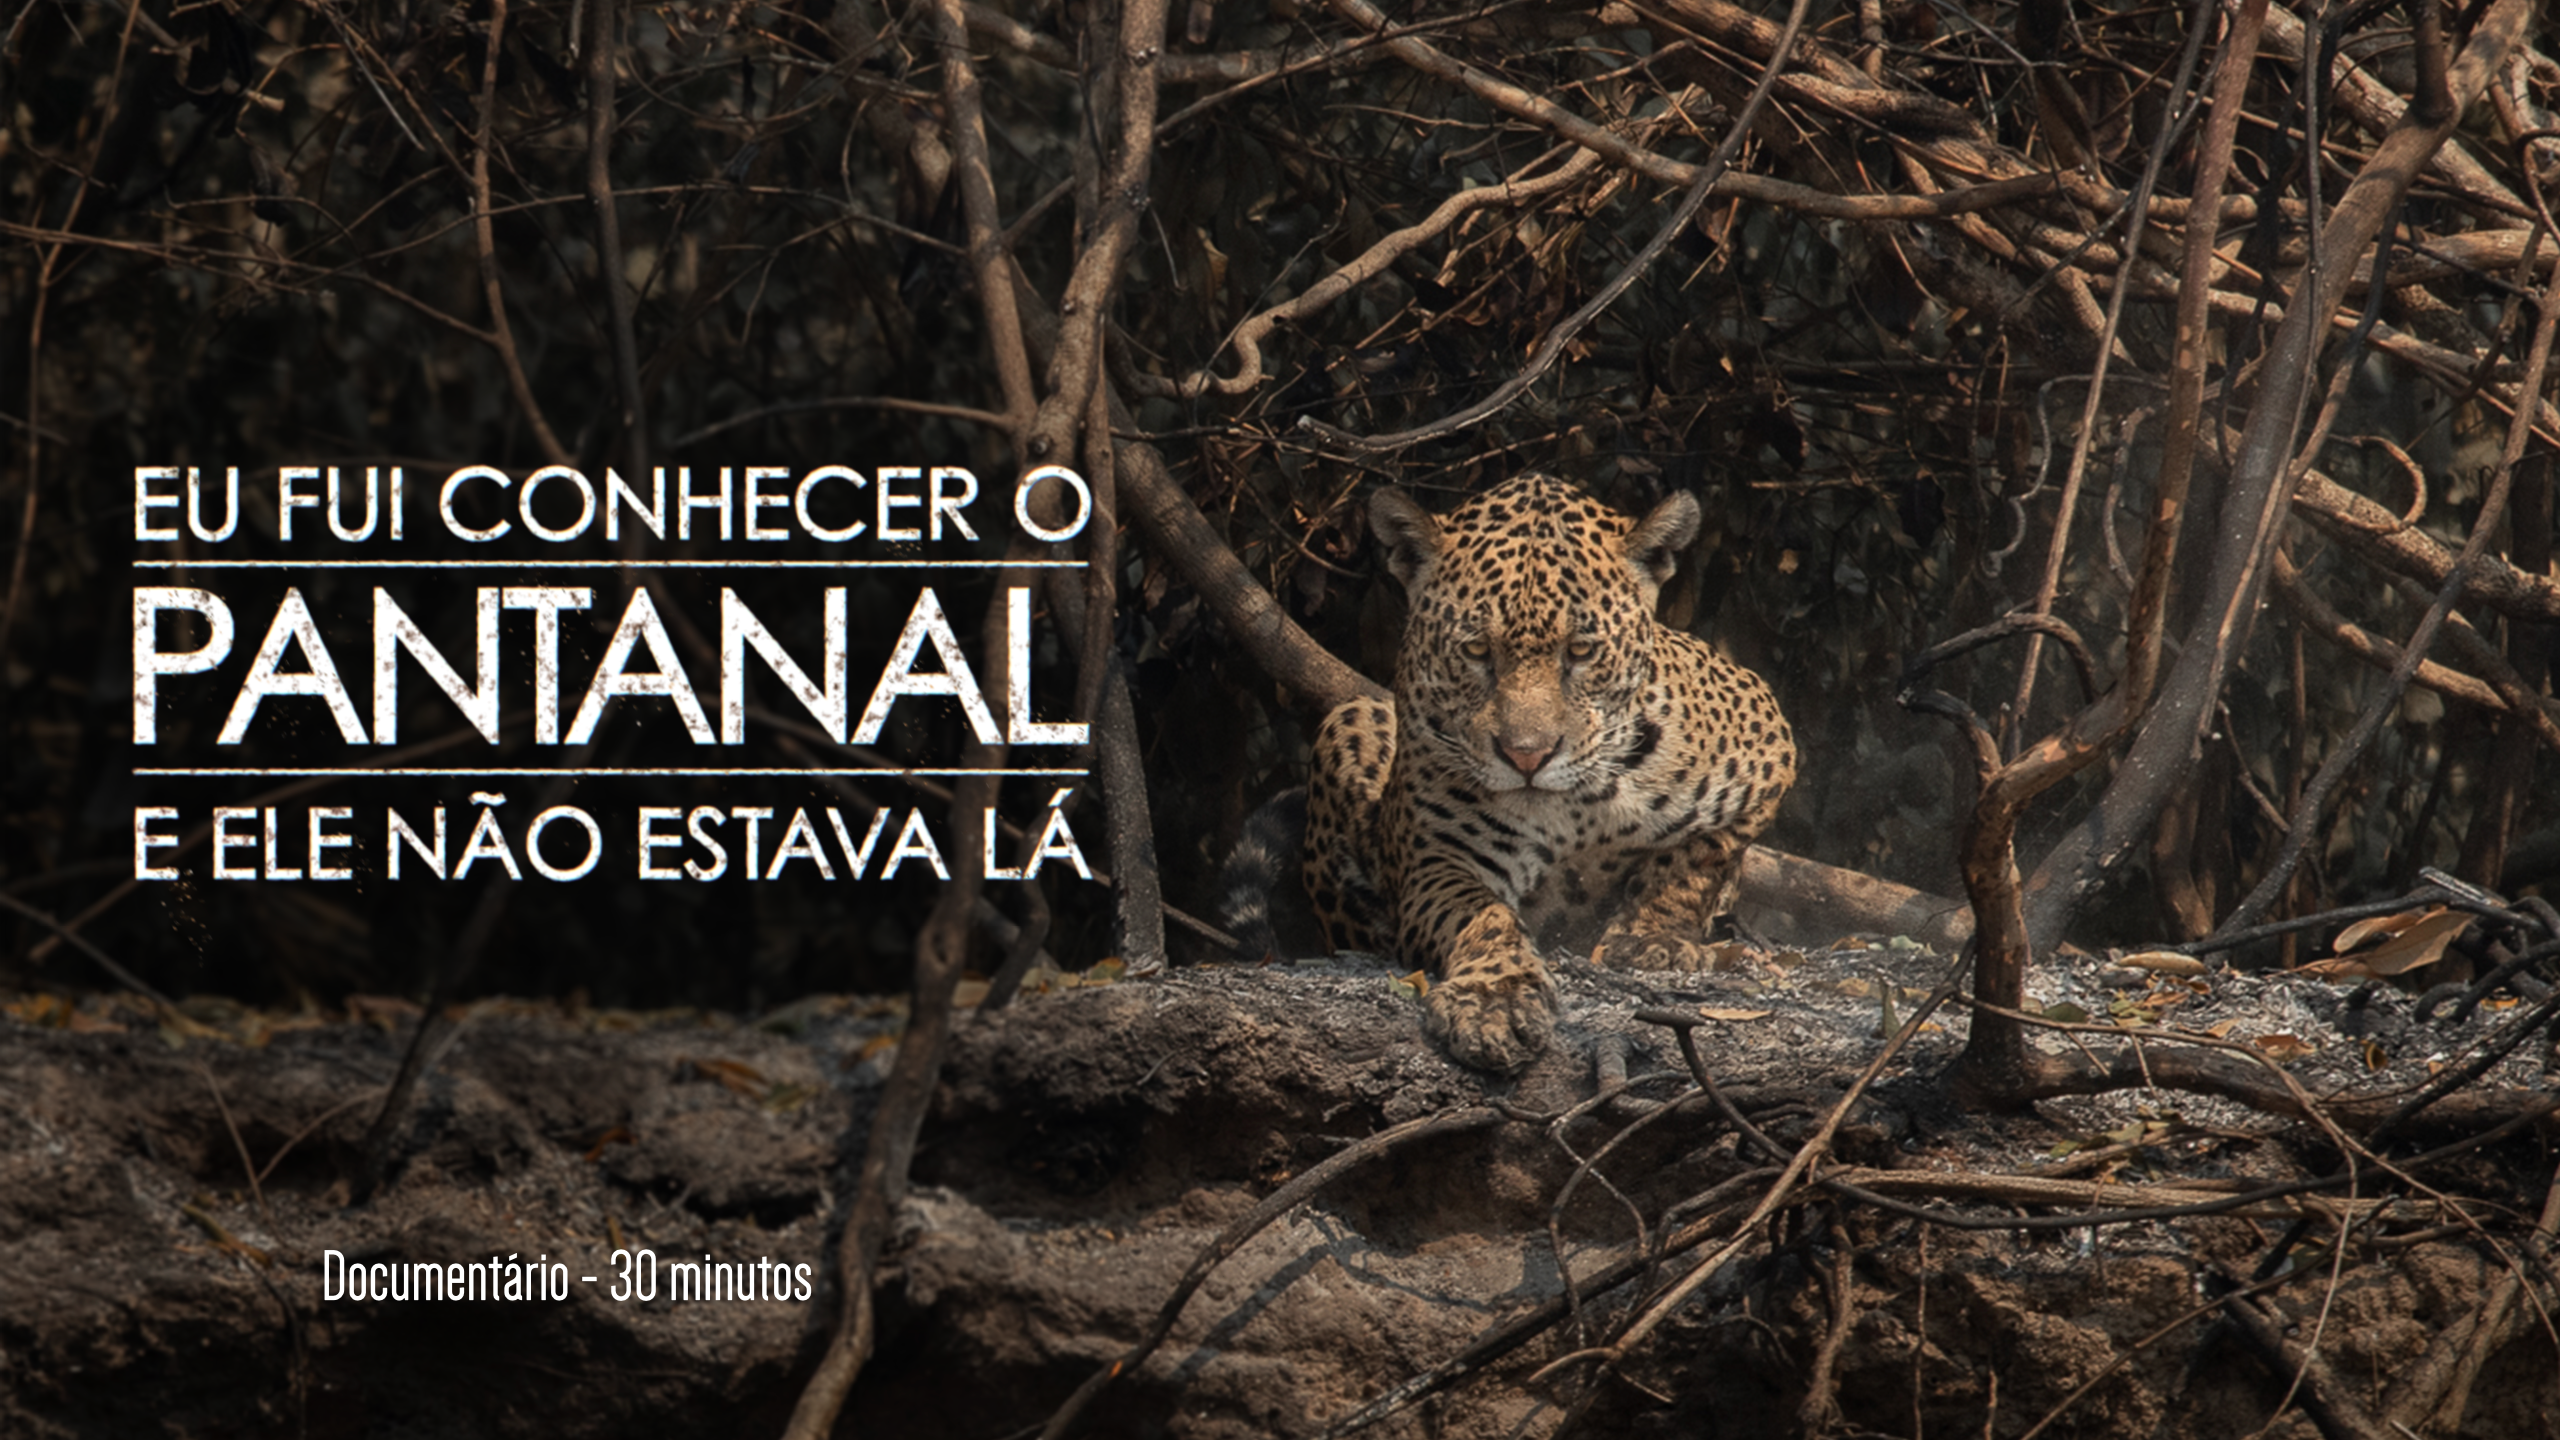 I went to see the Pantanal and it wasn’t there